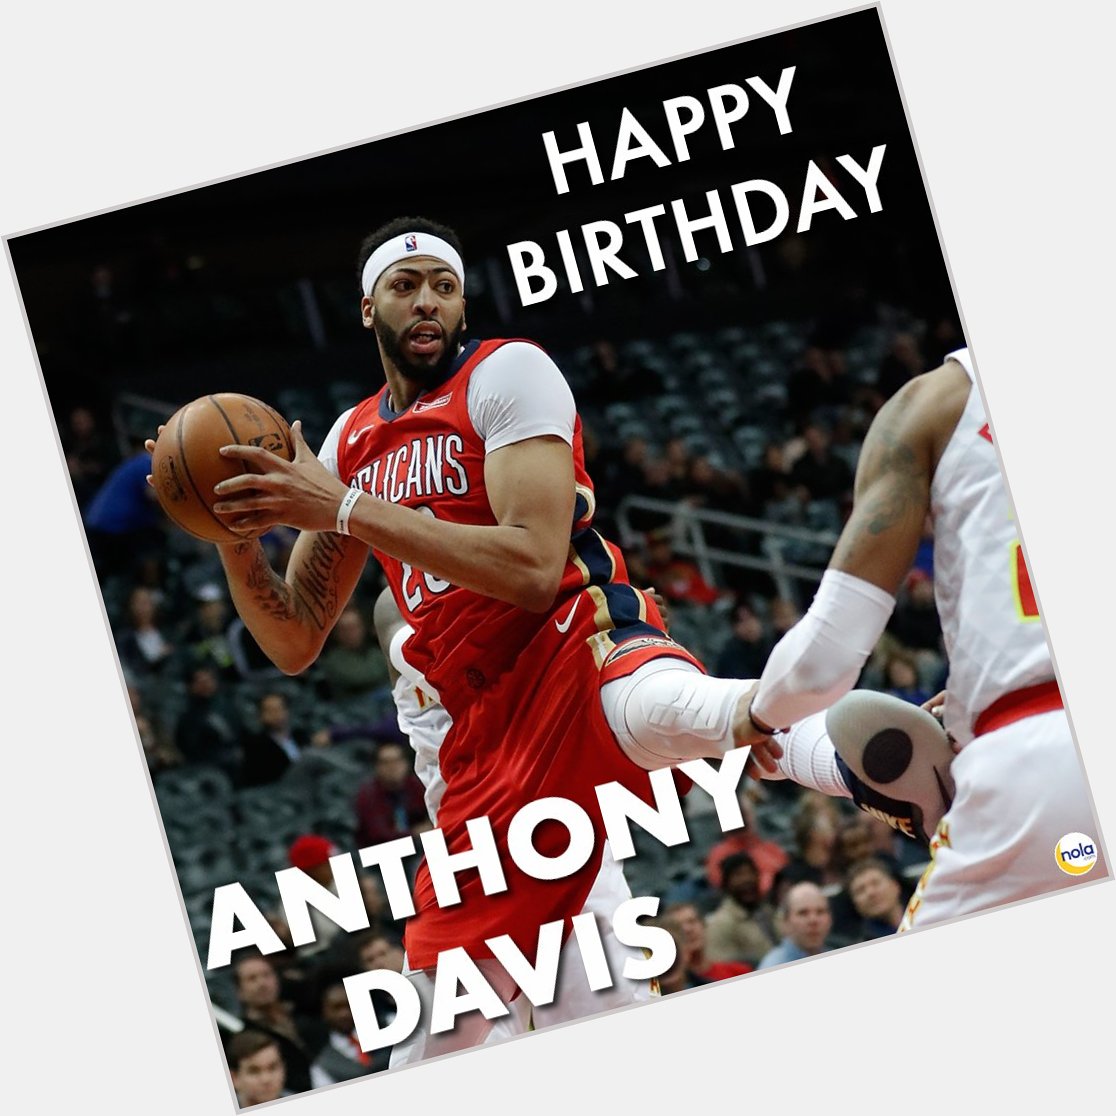 Lets wish All-Star and GOAT Anthony Davis a very Happy Birthday! 